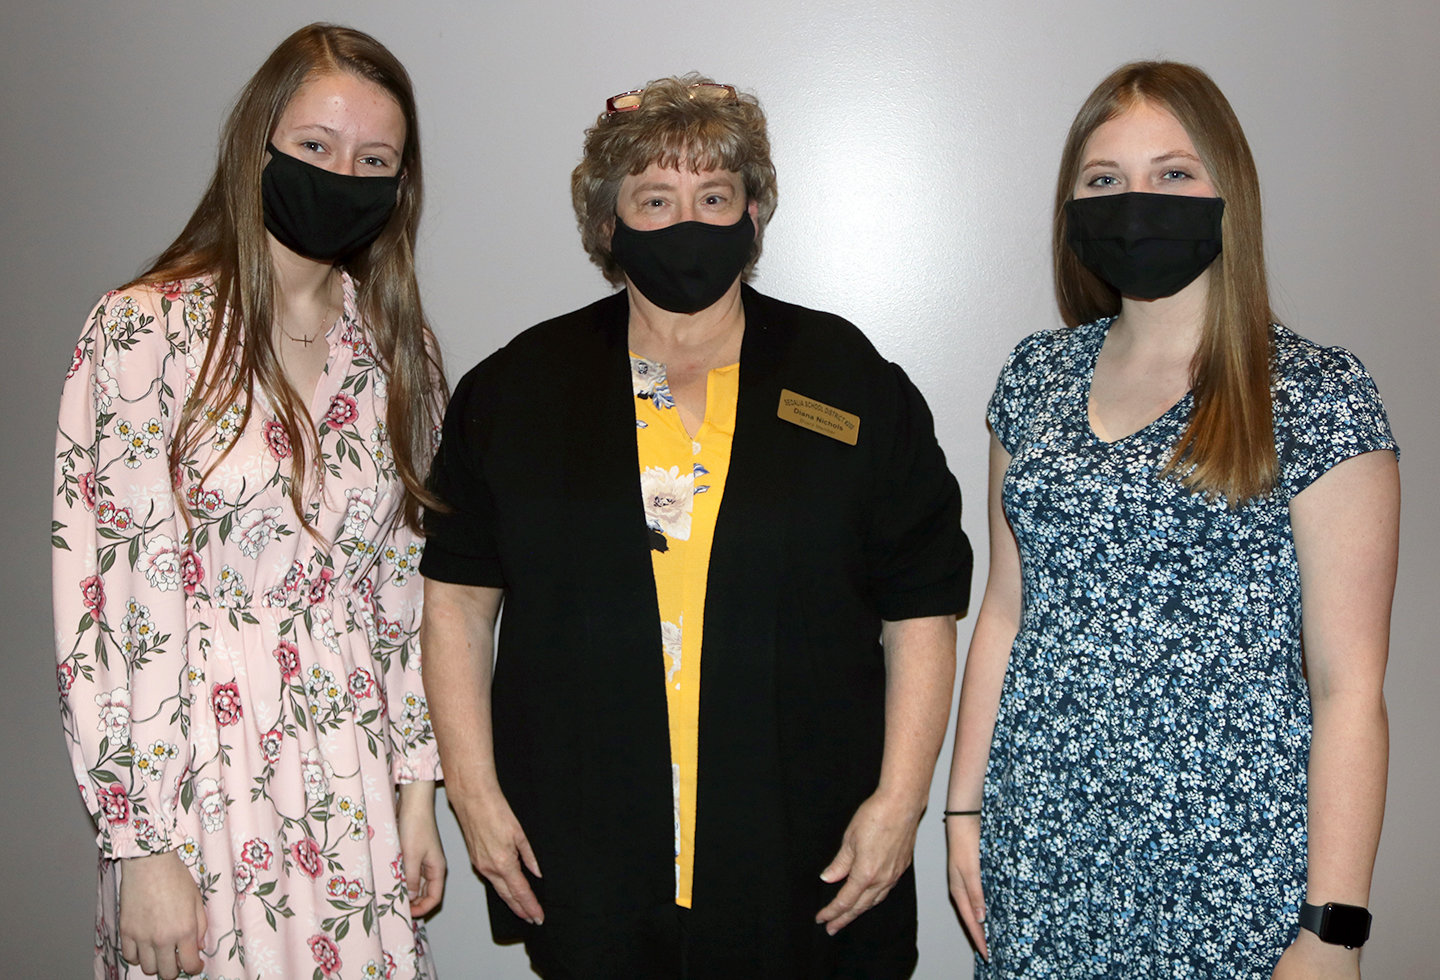 Smith-Cotton High School seniors Kylie Neal, left, and Emily Cote, right, are congratulated by Sedalia School District 200 Board of Education President Diana Nichols for their selections as Tiger Legacy scholarship recipients at the April 19 board meeting in the Heckart Performing Arts Center.